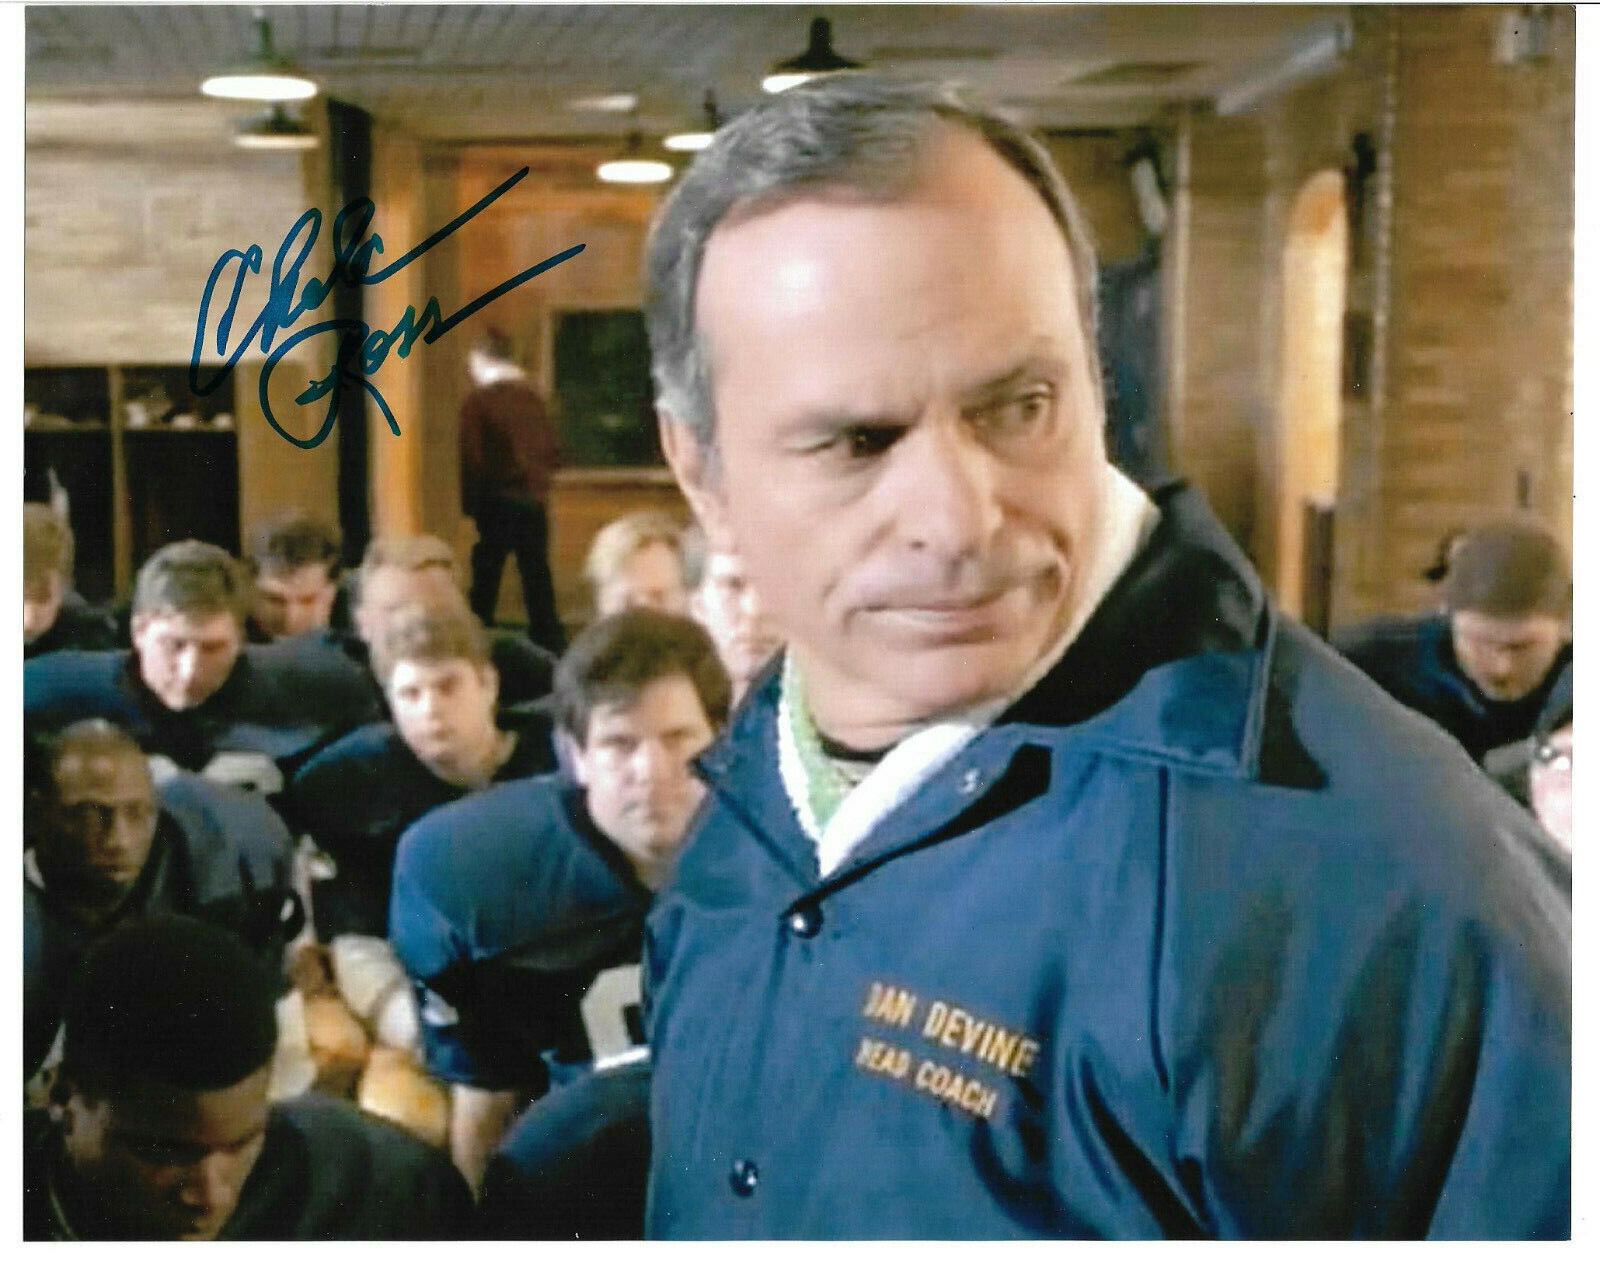 Chelcie Ross Authentic Signed 8x10 Photo Poster painting Autograph, Rudy, Dan Devine, Notre Dame